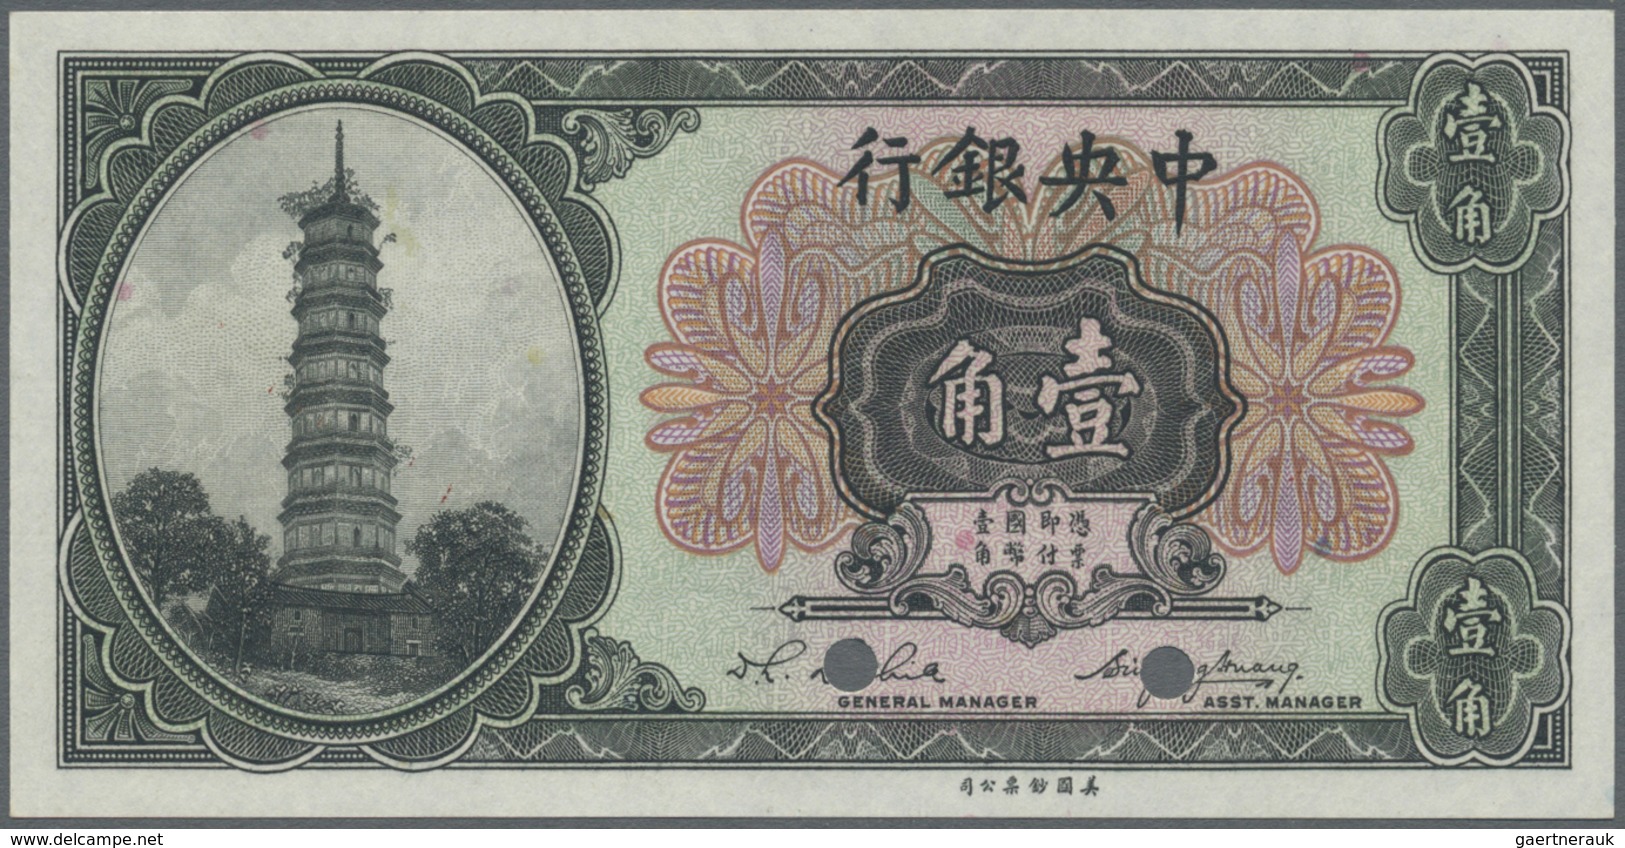 China: Set Of 2 Notes Central Bank Of China Containing 10 And 20 Cents ND P. 193s, 194s Specimen, Bo - China